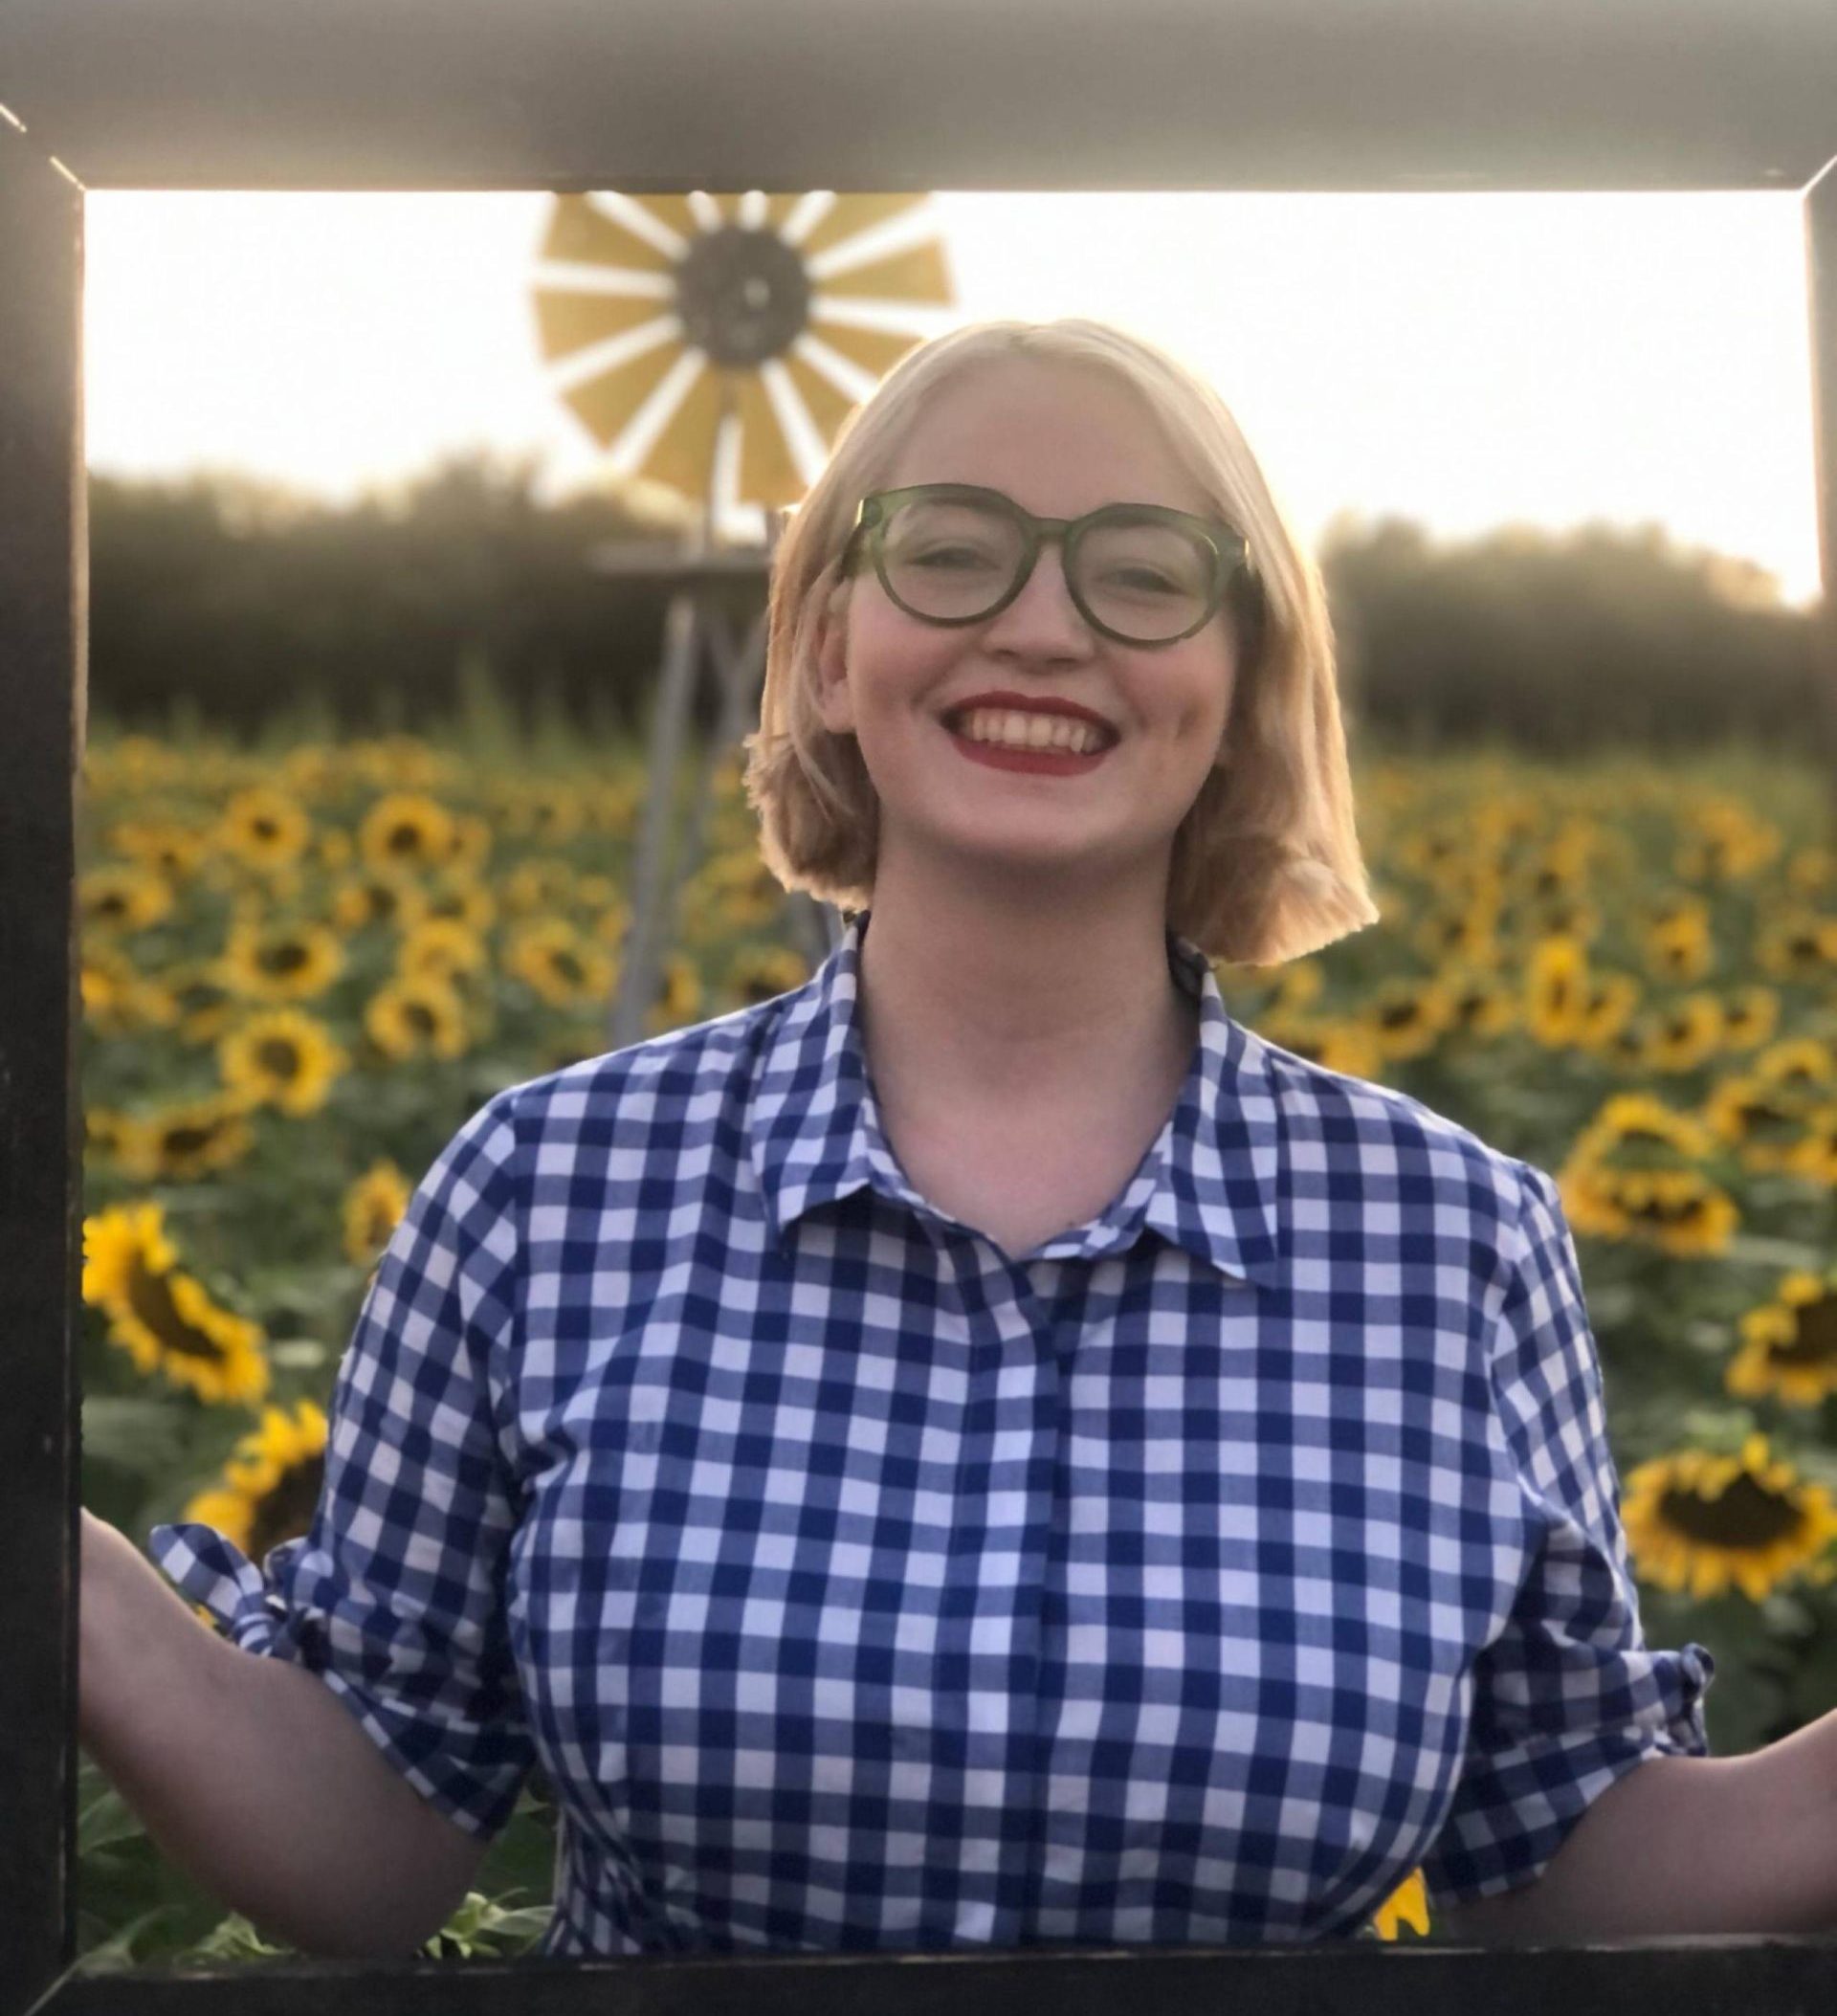 girl with short blonde hair and glasses in a blue and white gingham shirt standing in a field of sunflowers